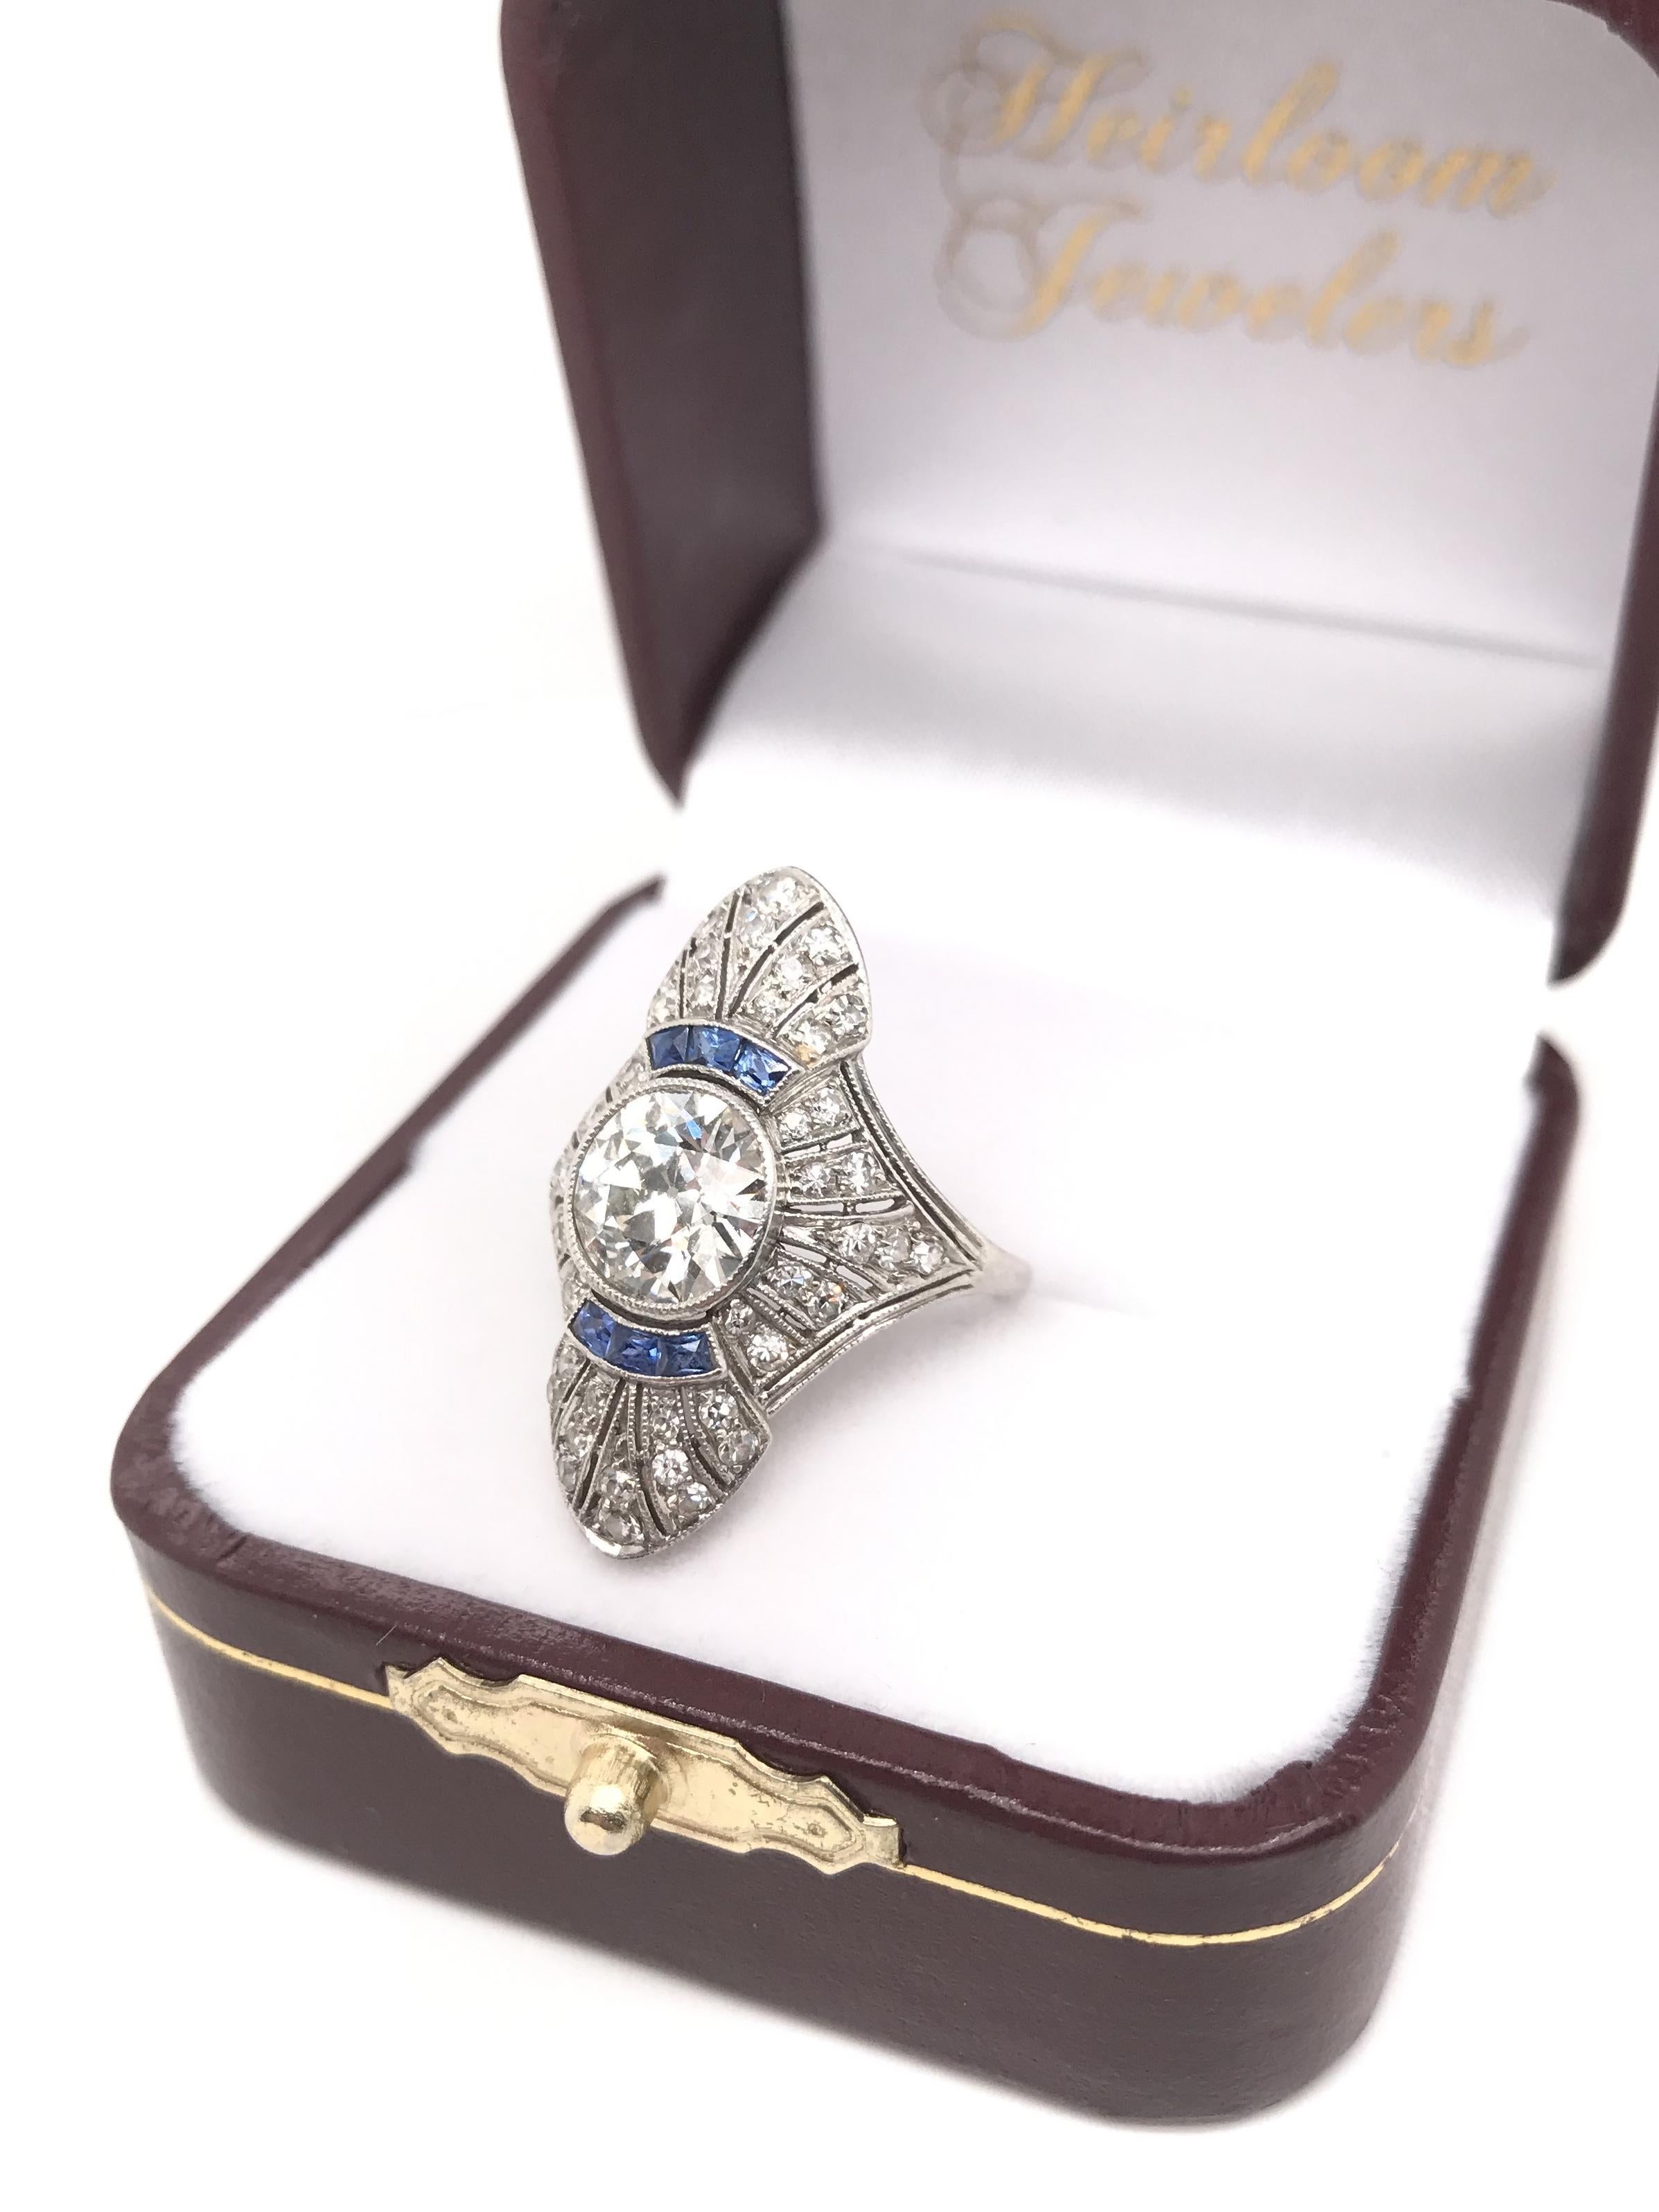 Antique Art Deco Diamond and French Cut Sapphire Dinner Ring 5